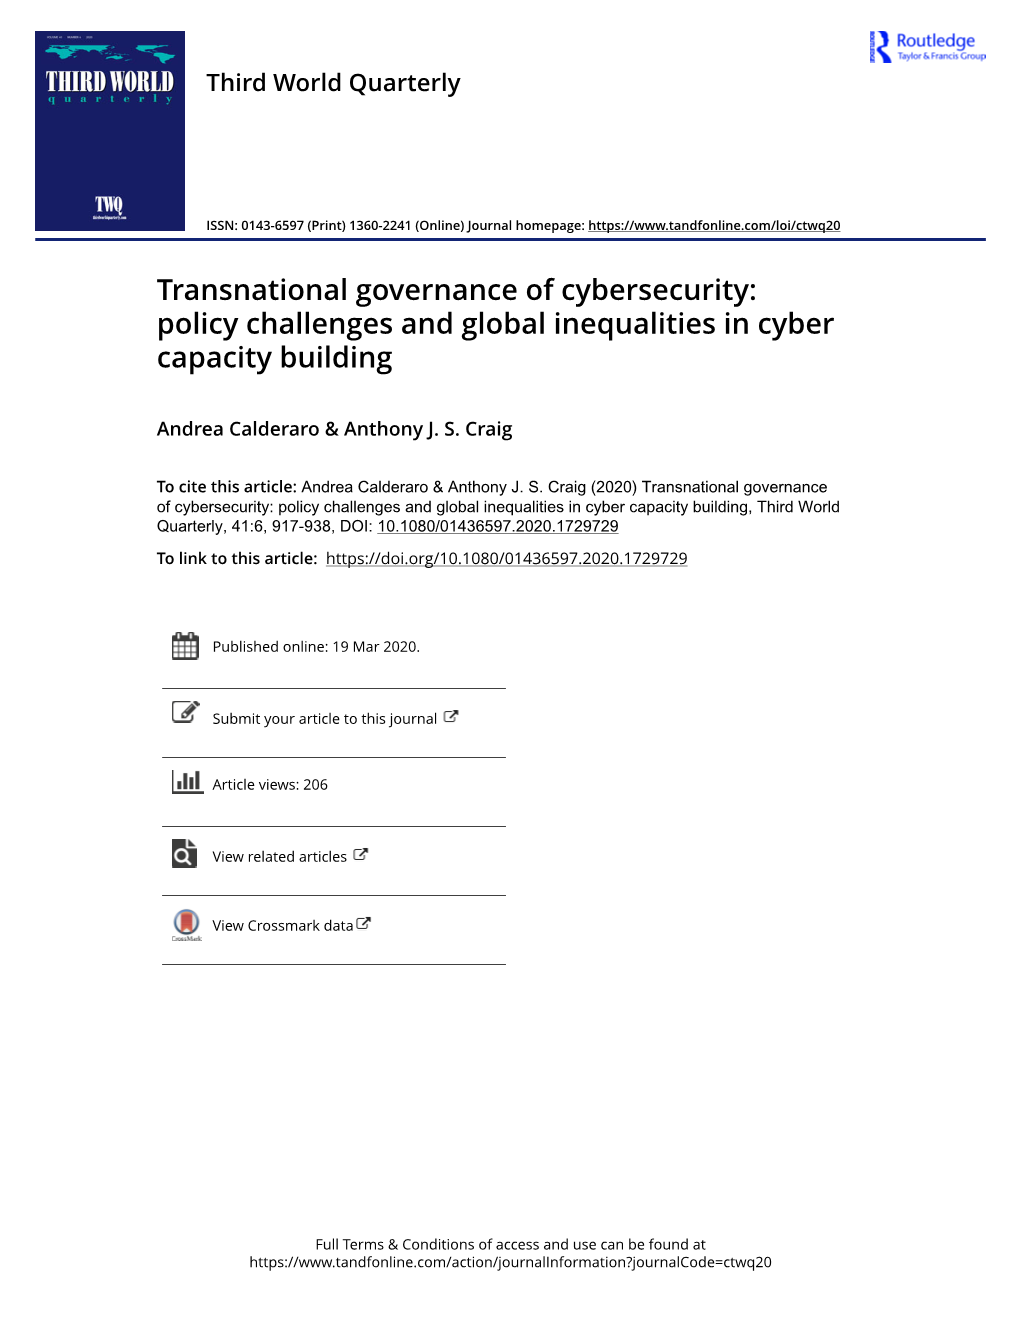 Policy Challenges and Global Inequalities in Cyber Capacity Building